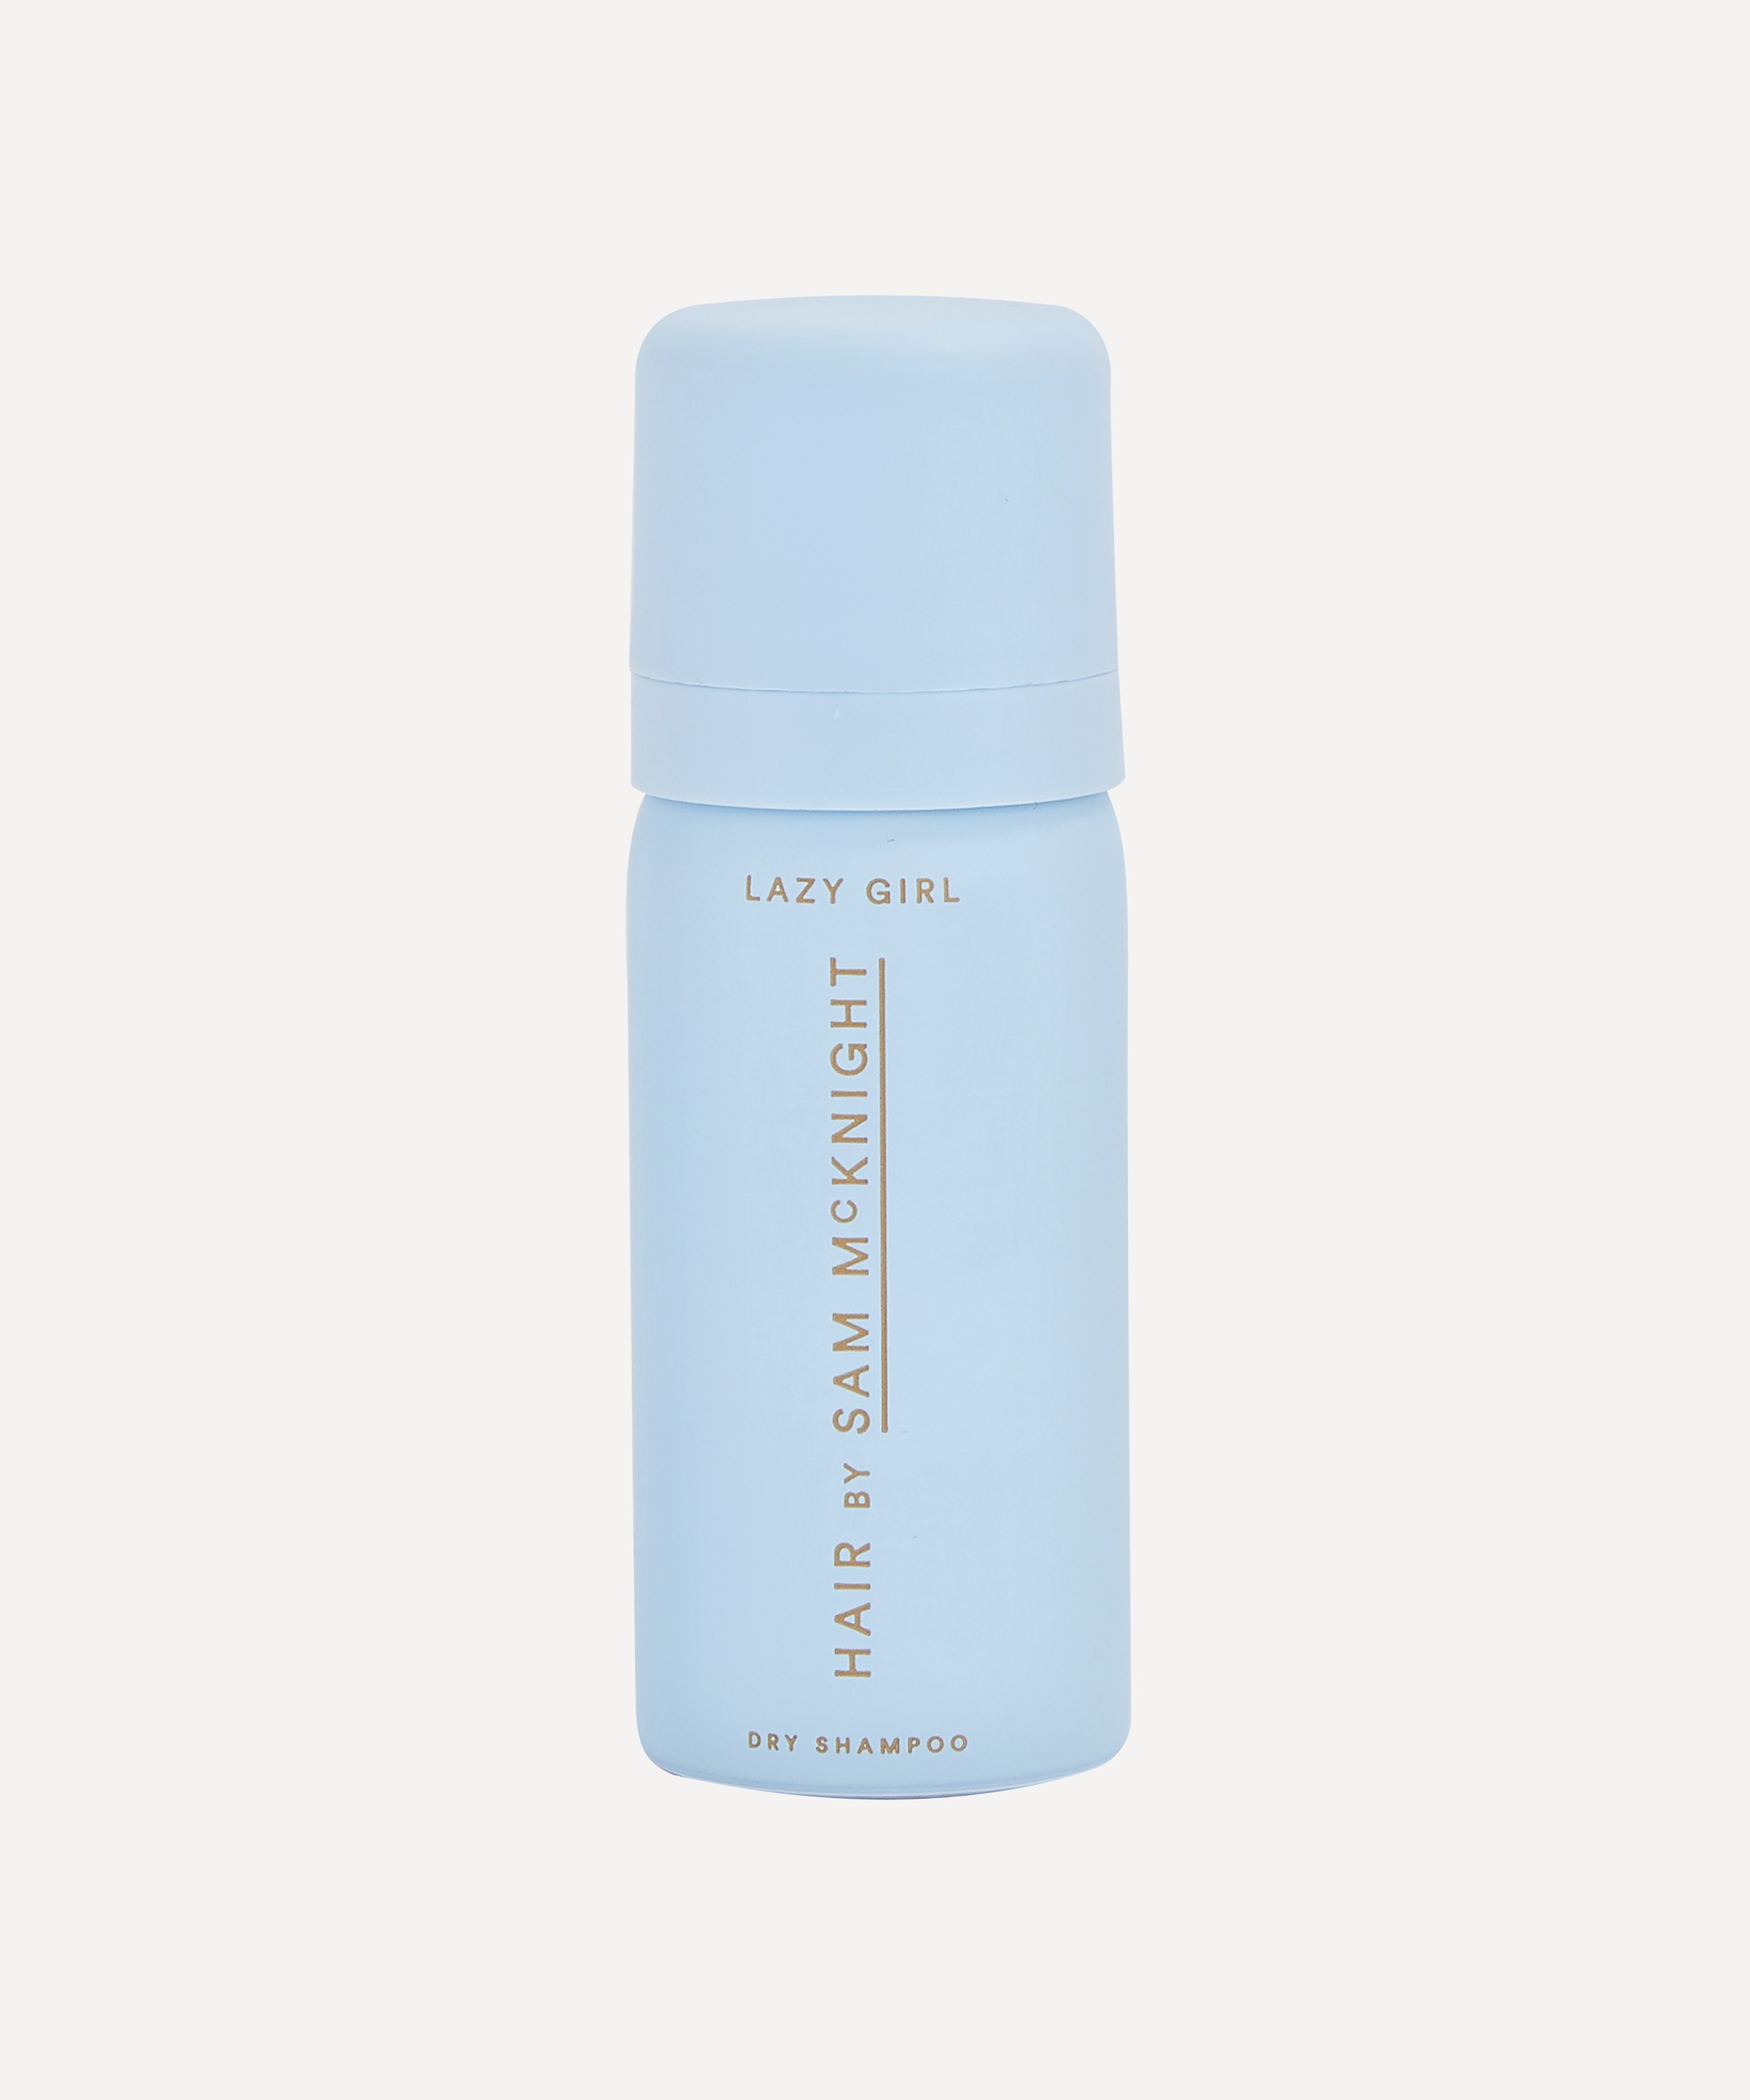 Hair by Sam McKnight - Exclusive Lazy Girl Dry Shampoo 50ml image number 1